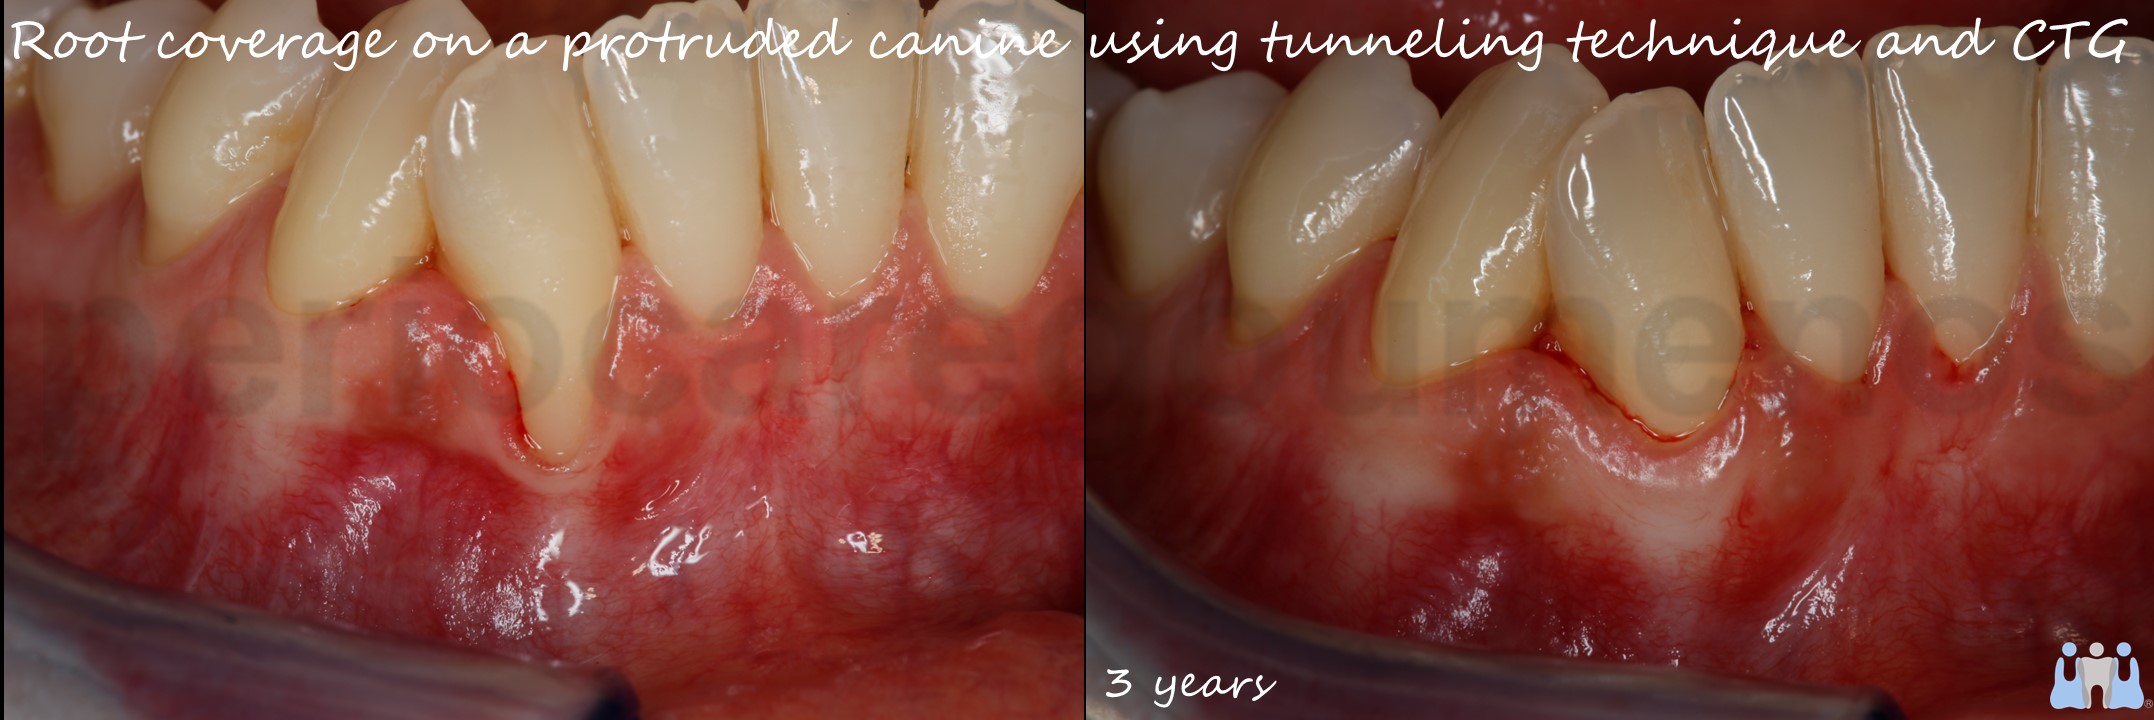 Root coverage on a protruded lower canine